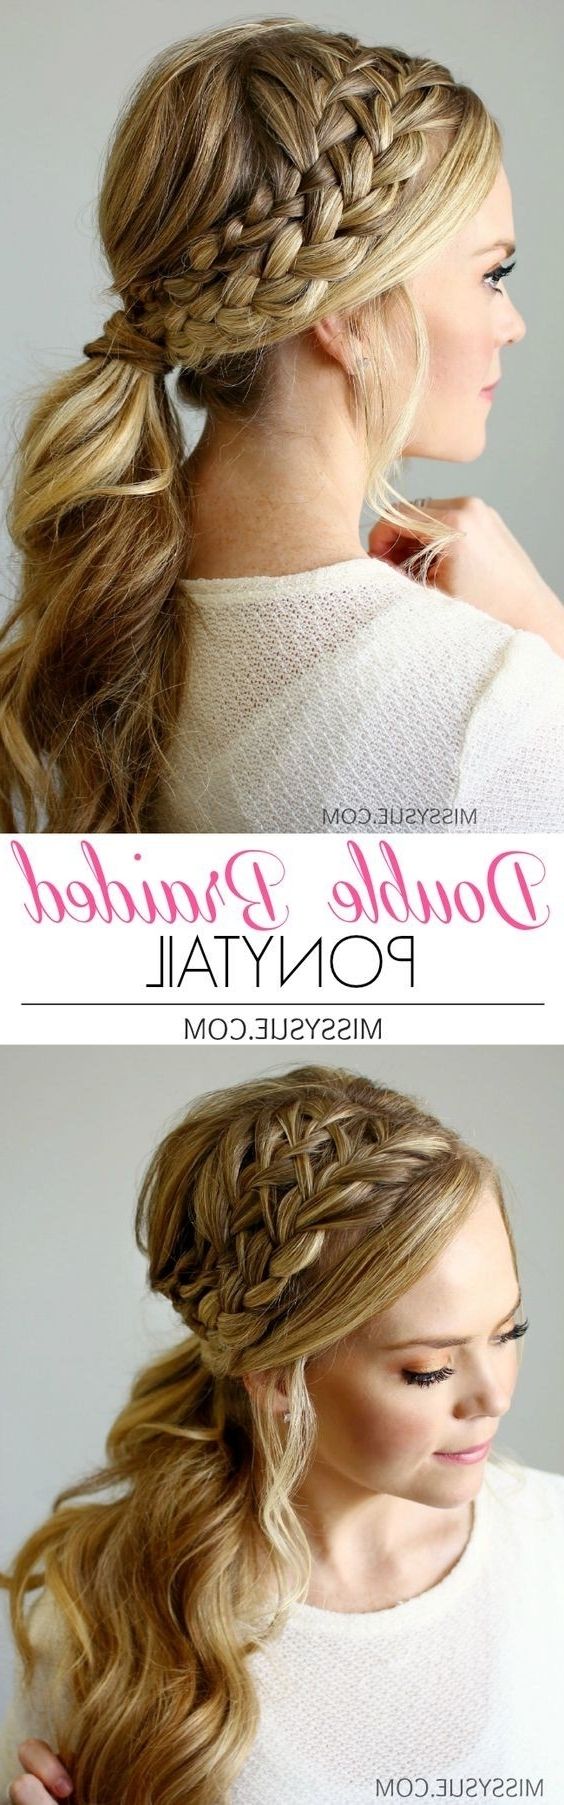 18 Cute Braided Ponytail Styles – Popular Haircuts Within Latest Side Braided Ponytail Hairstyles (View 9 of 20)